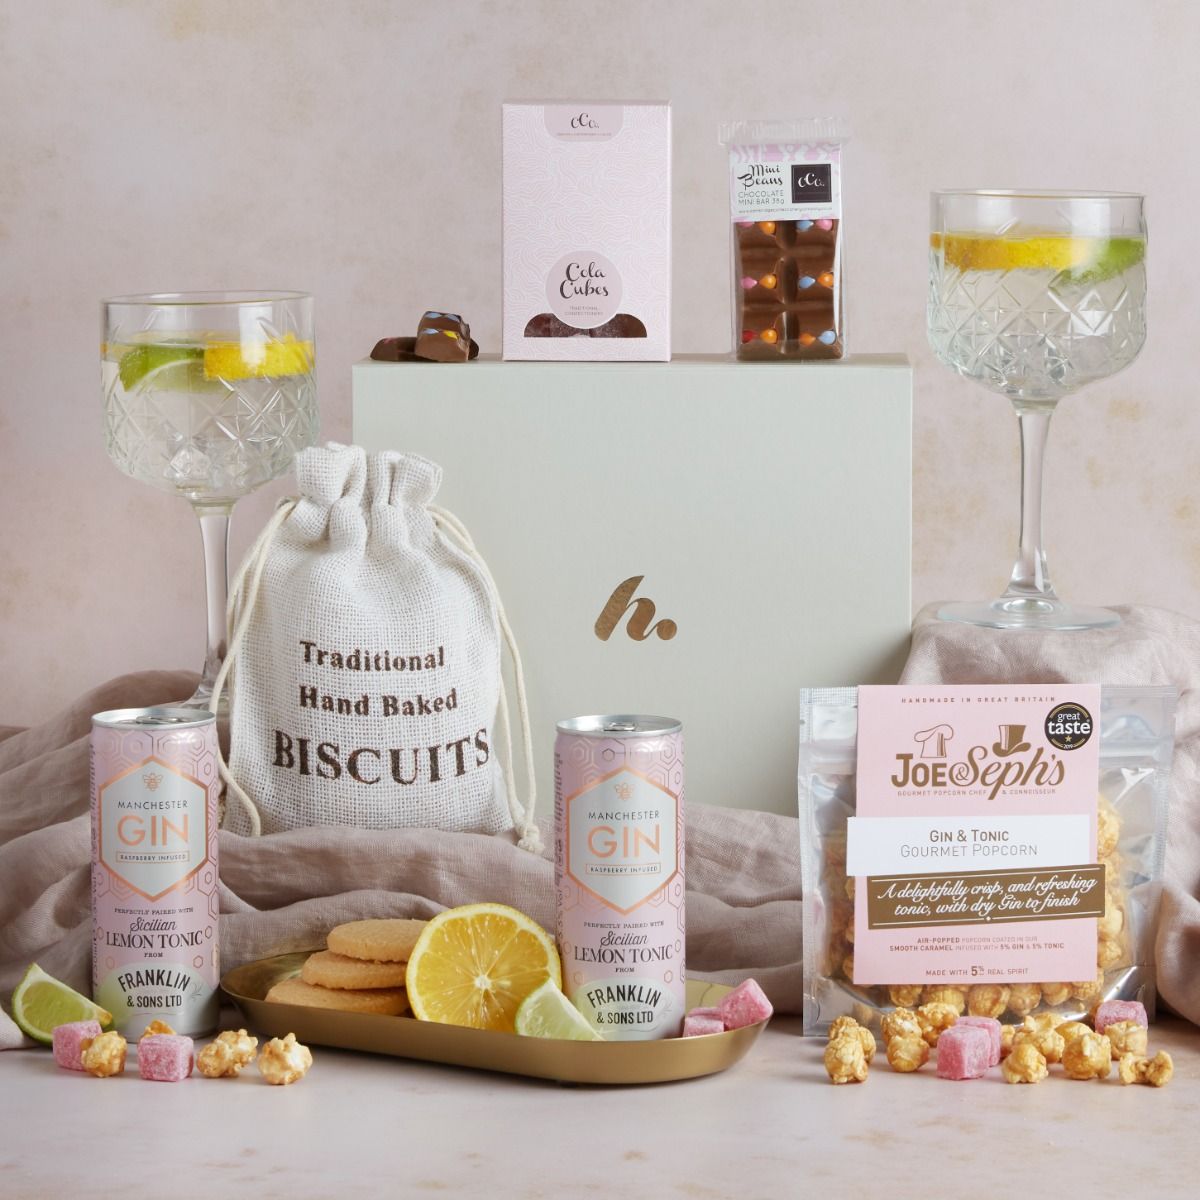 The Gin and Treats Hamper with contents on display and signature gift box